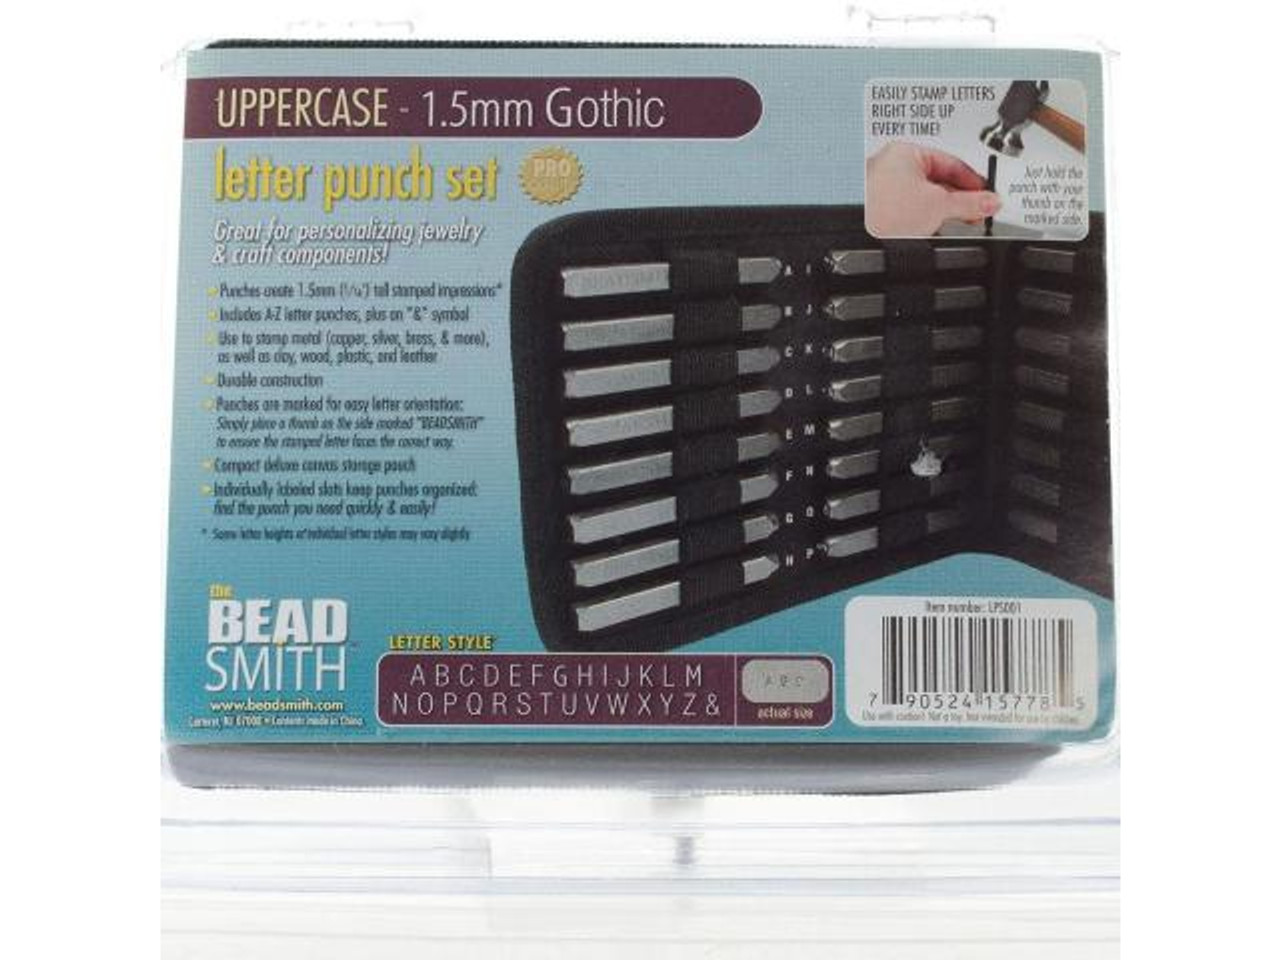 The Beadsmith Letter Punches